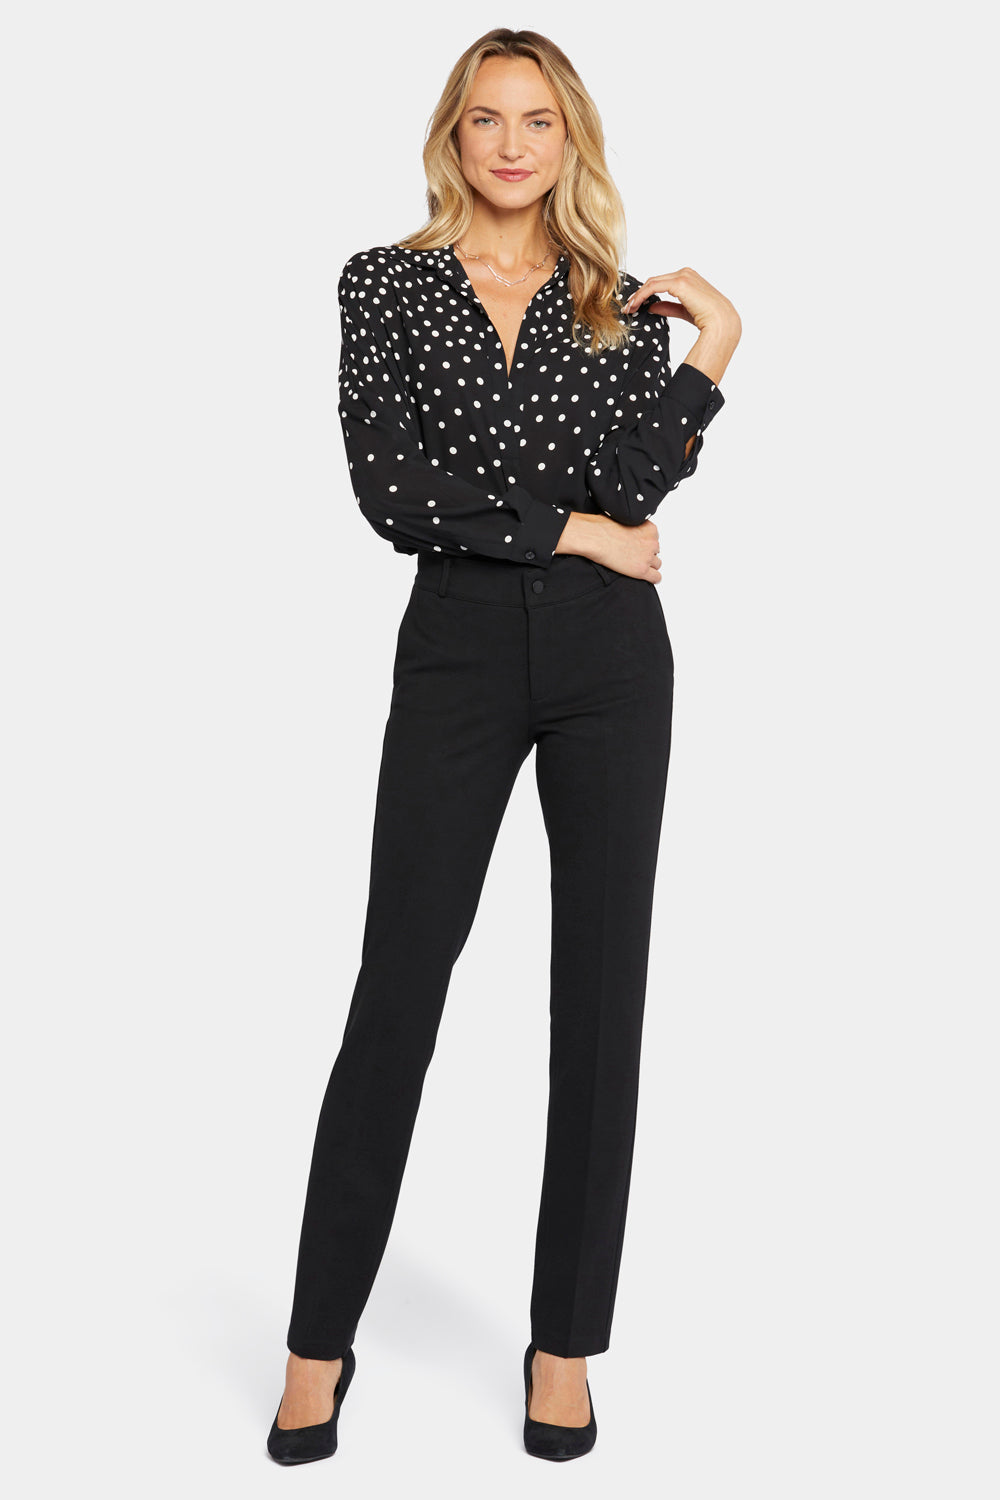 ZW COLLECTION CREASED POLKA DOT BLOUSE - blue